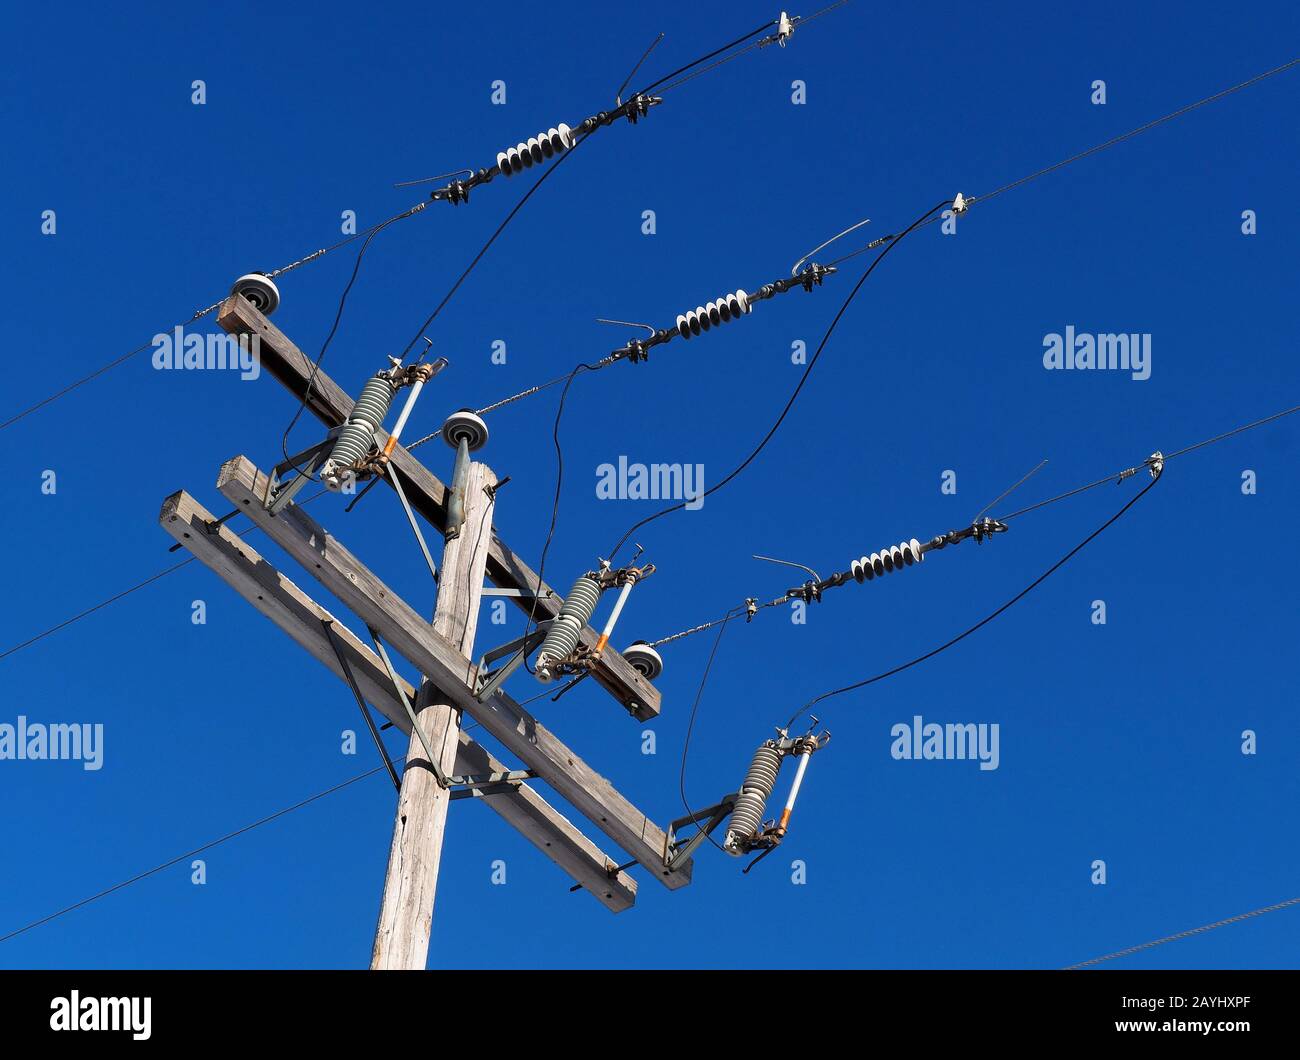 Quebec,Canada. High voltage power lines with circuit breakers Stock Photo